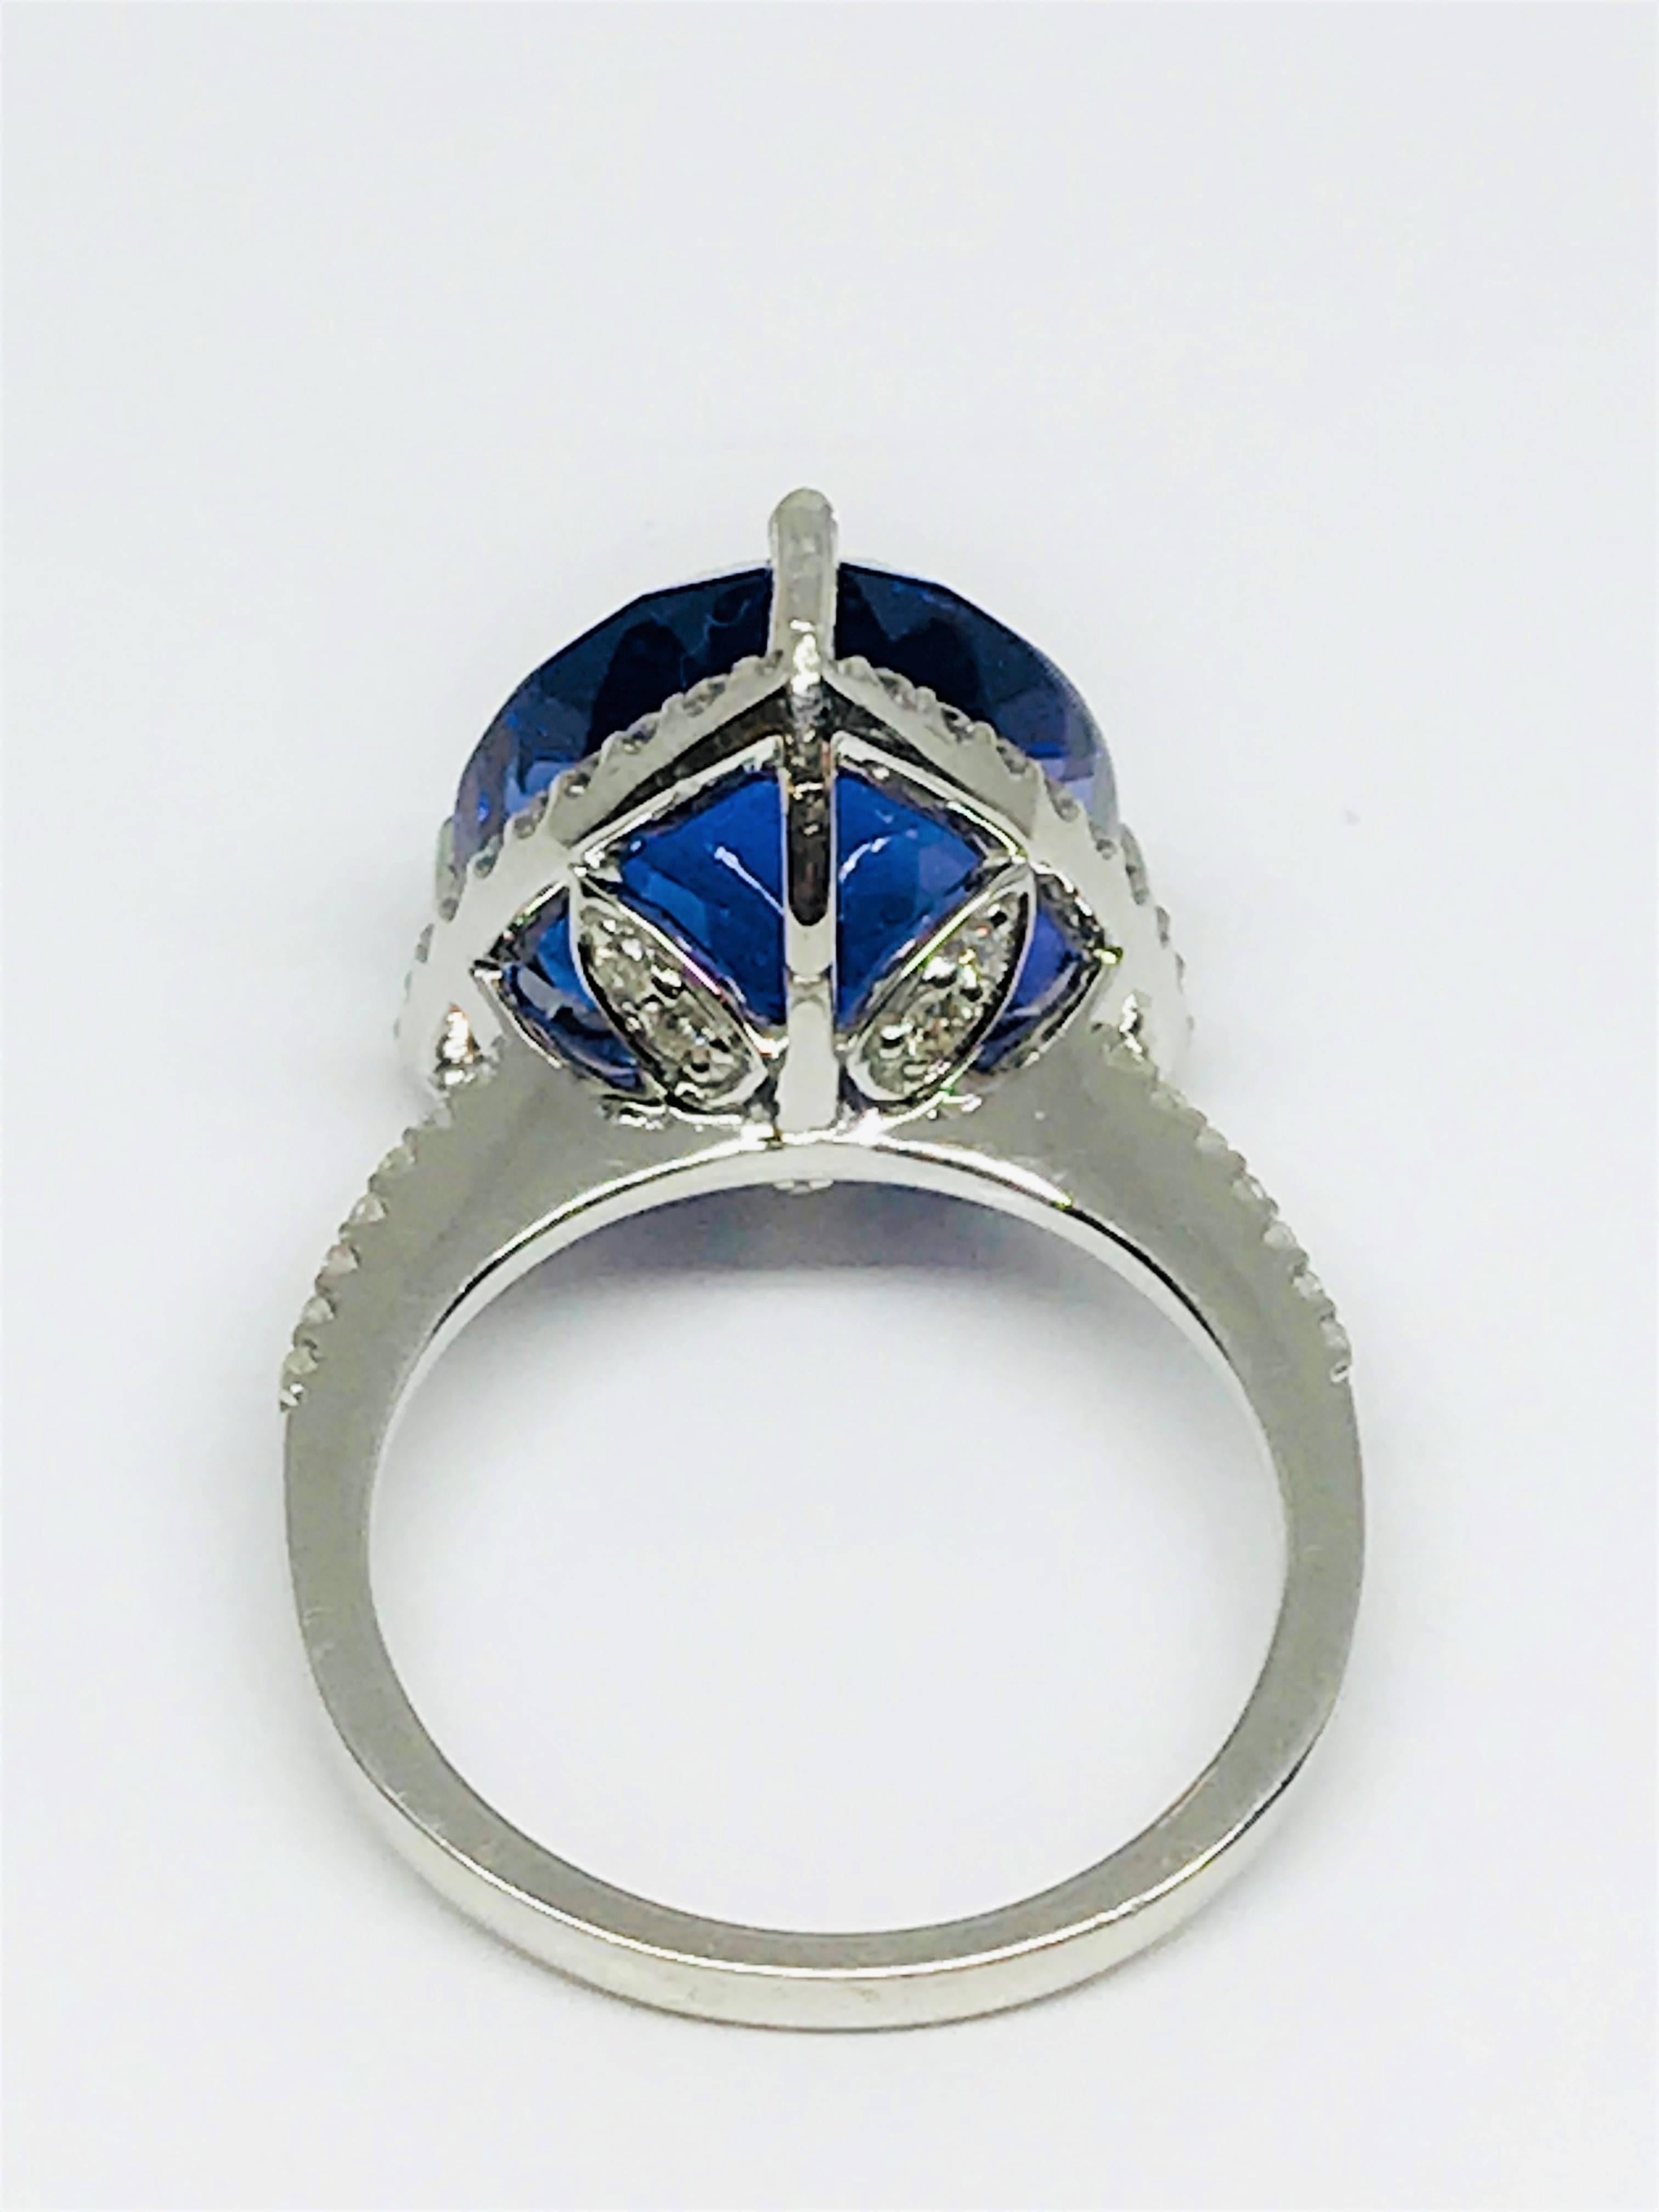 11.71 Carat Natural Trillion Shape Tanzanite and Diamond Halo Ring 14 Karat Gold In Excellent Condition For Sale In Kent, CT